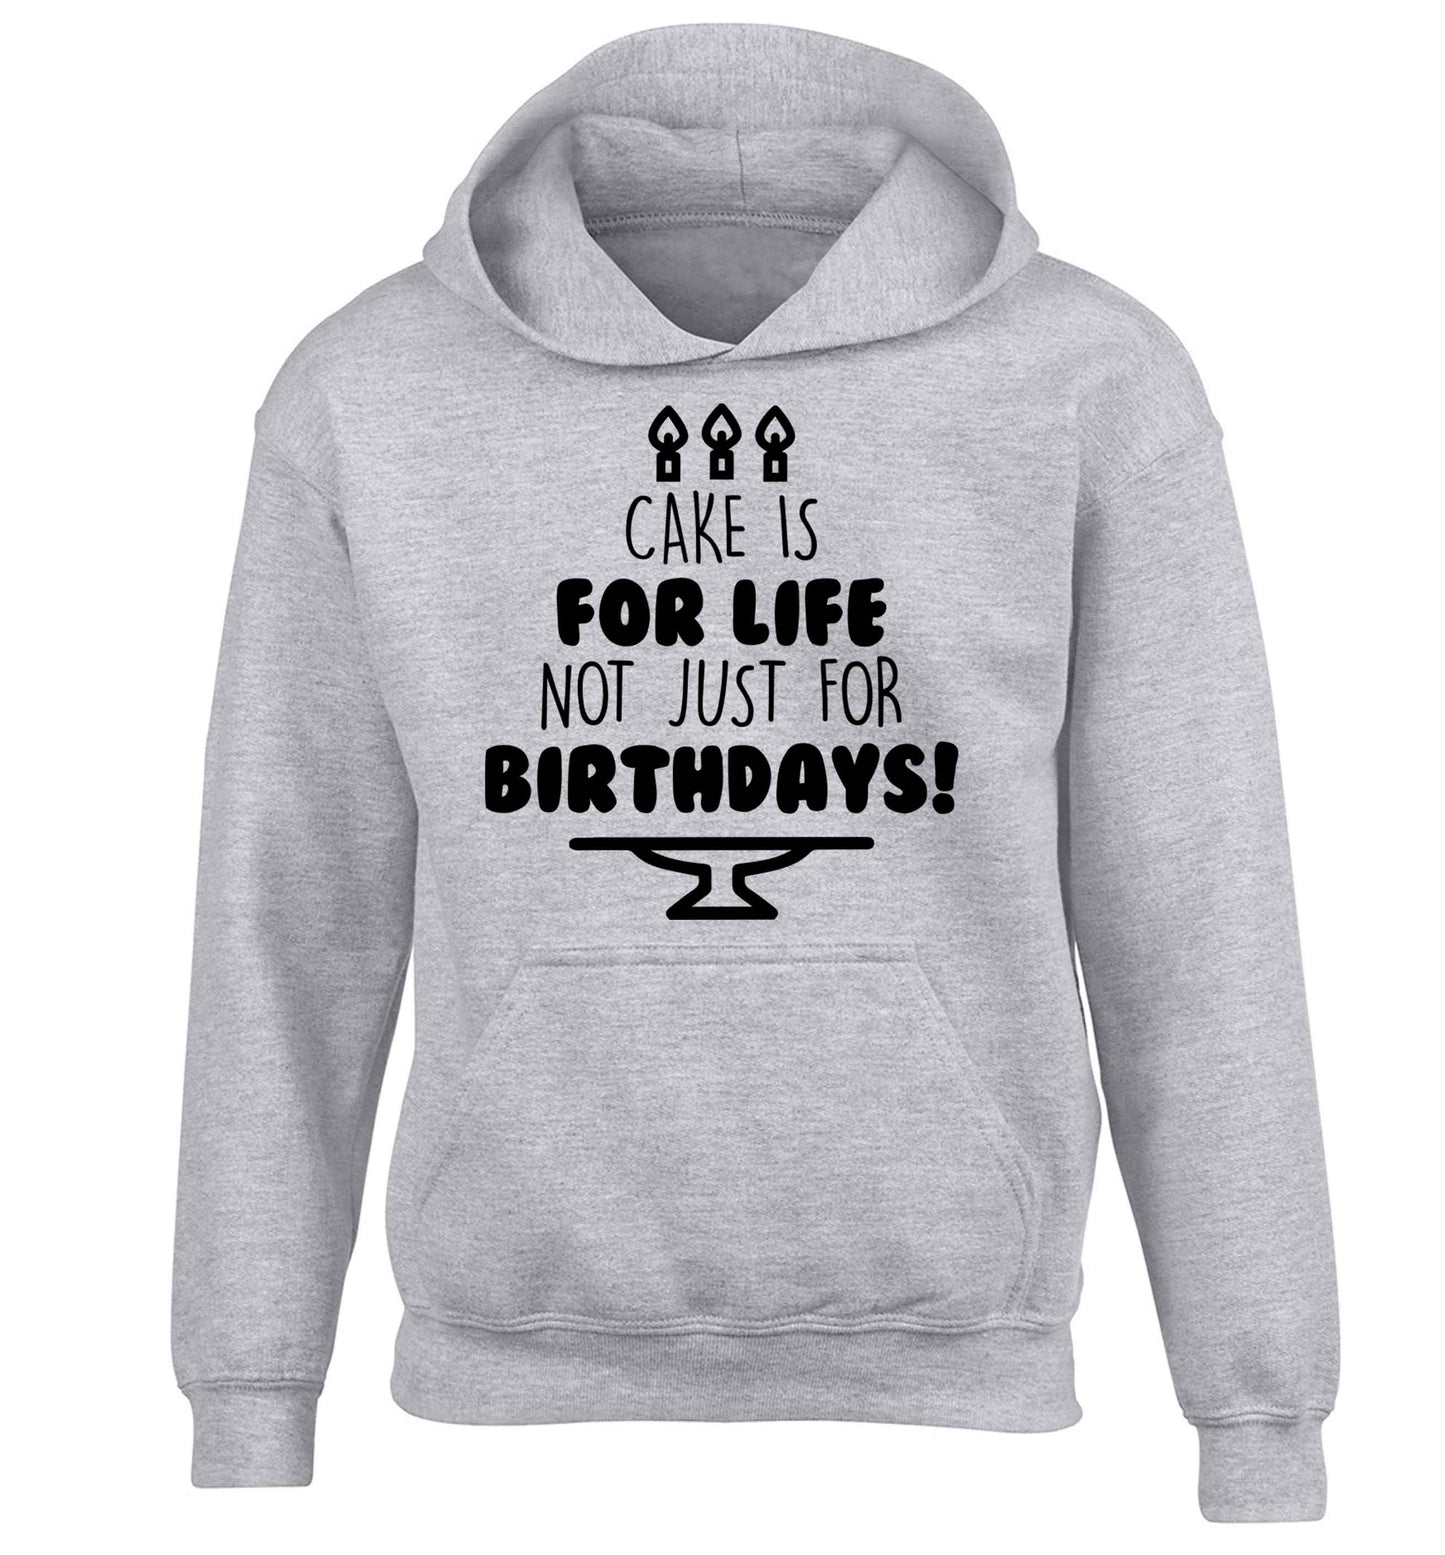 Cake is for life not just for birthdays children's grey hoodie 12-13 Years